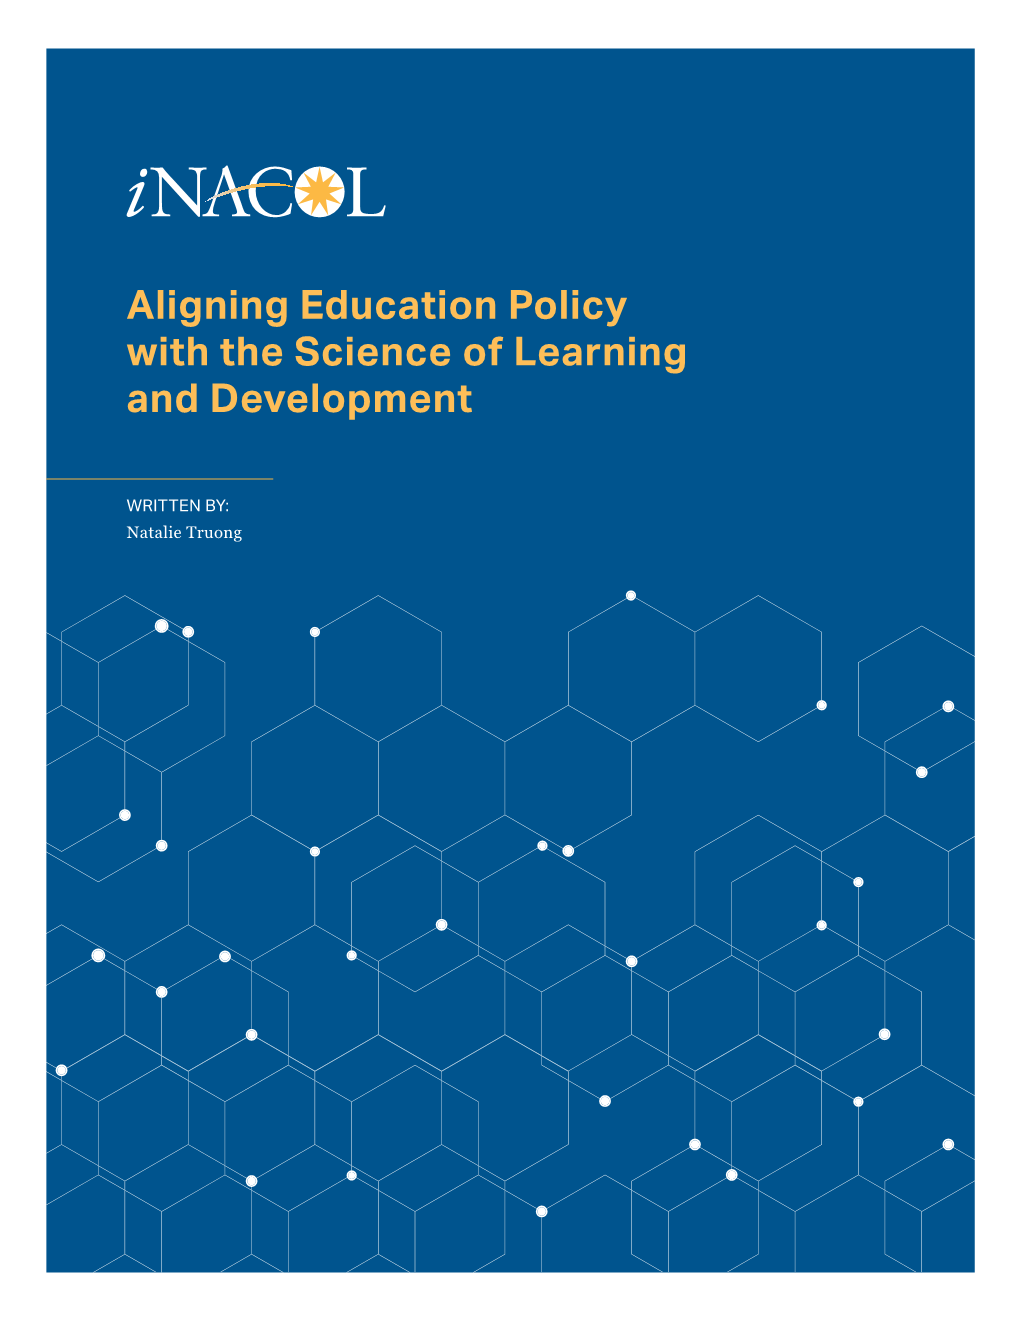 Aligning Education Policy with the Science of Learning and Development